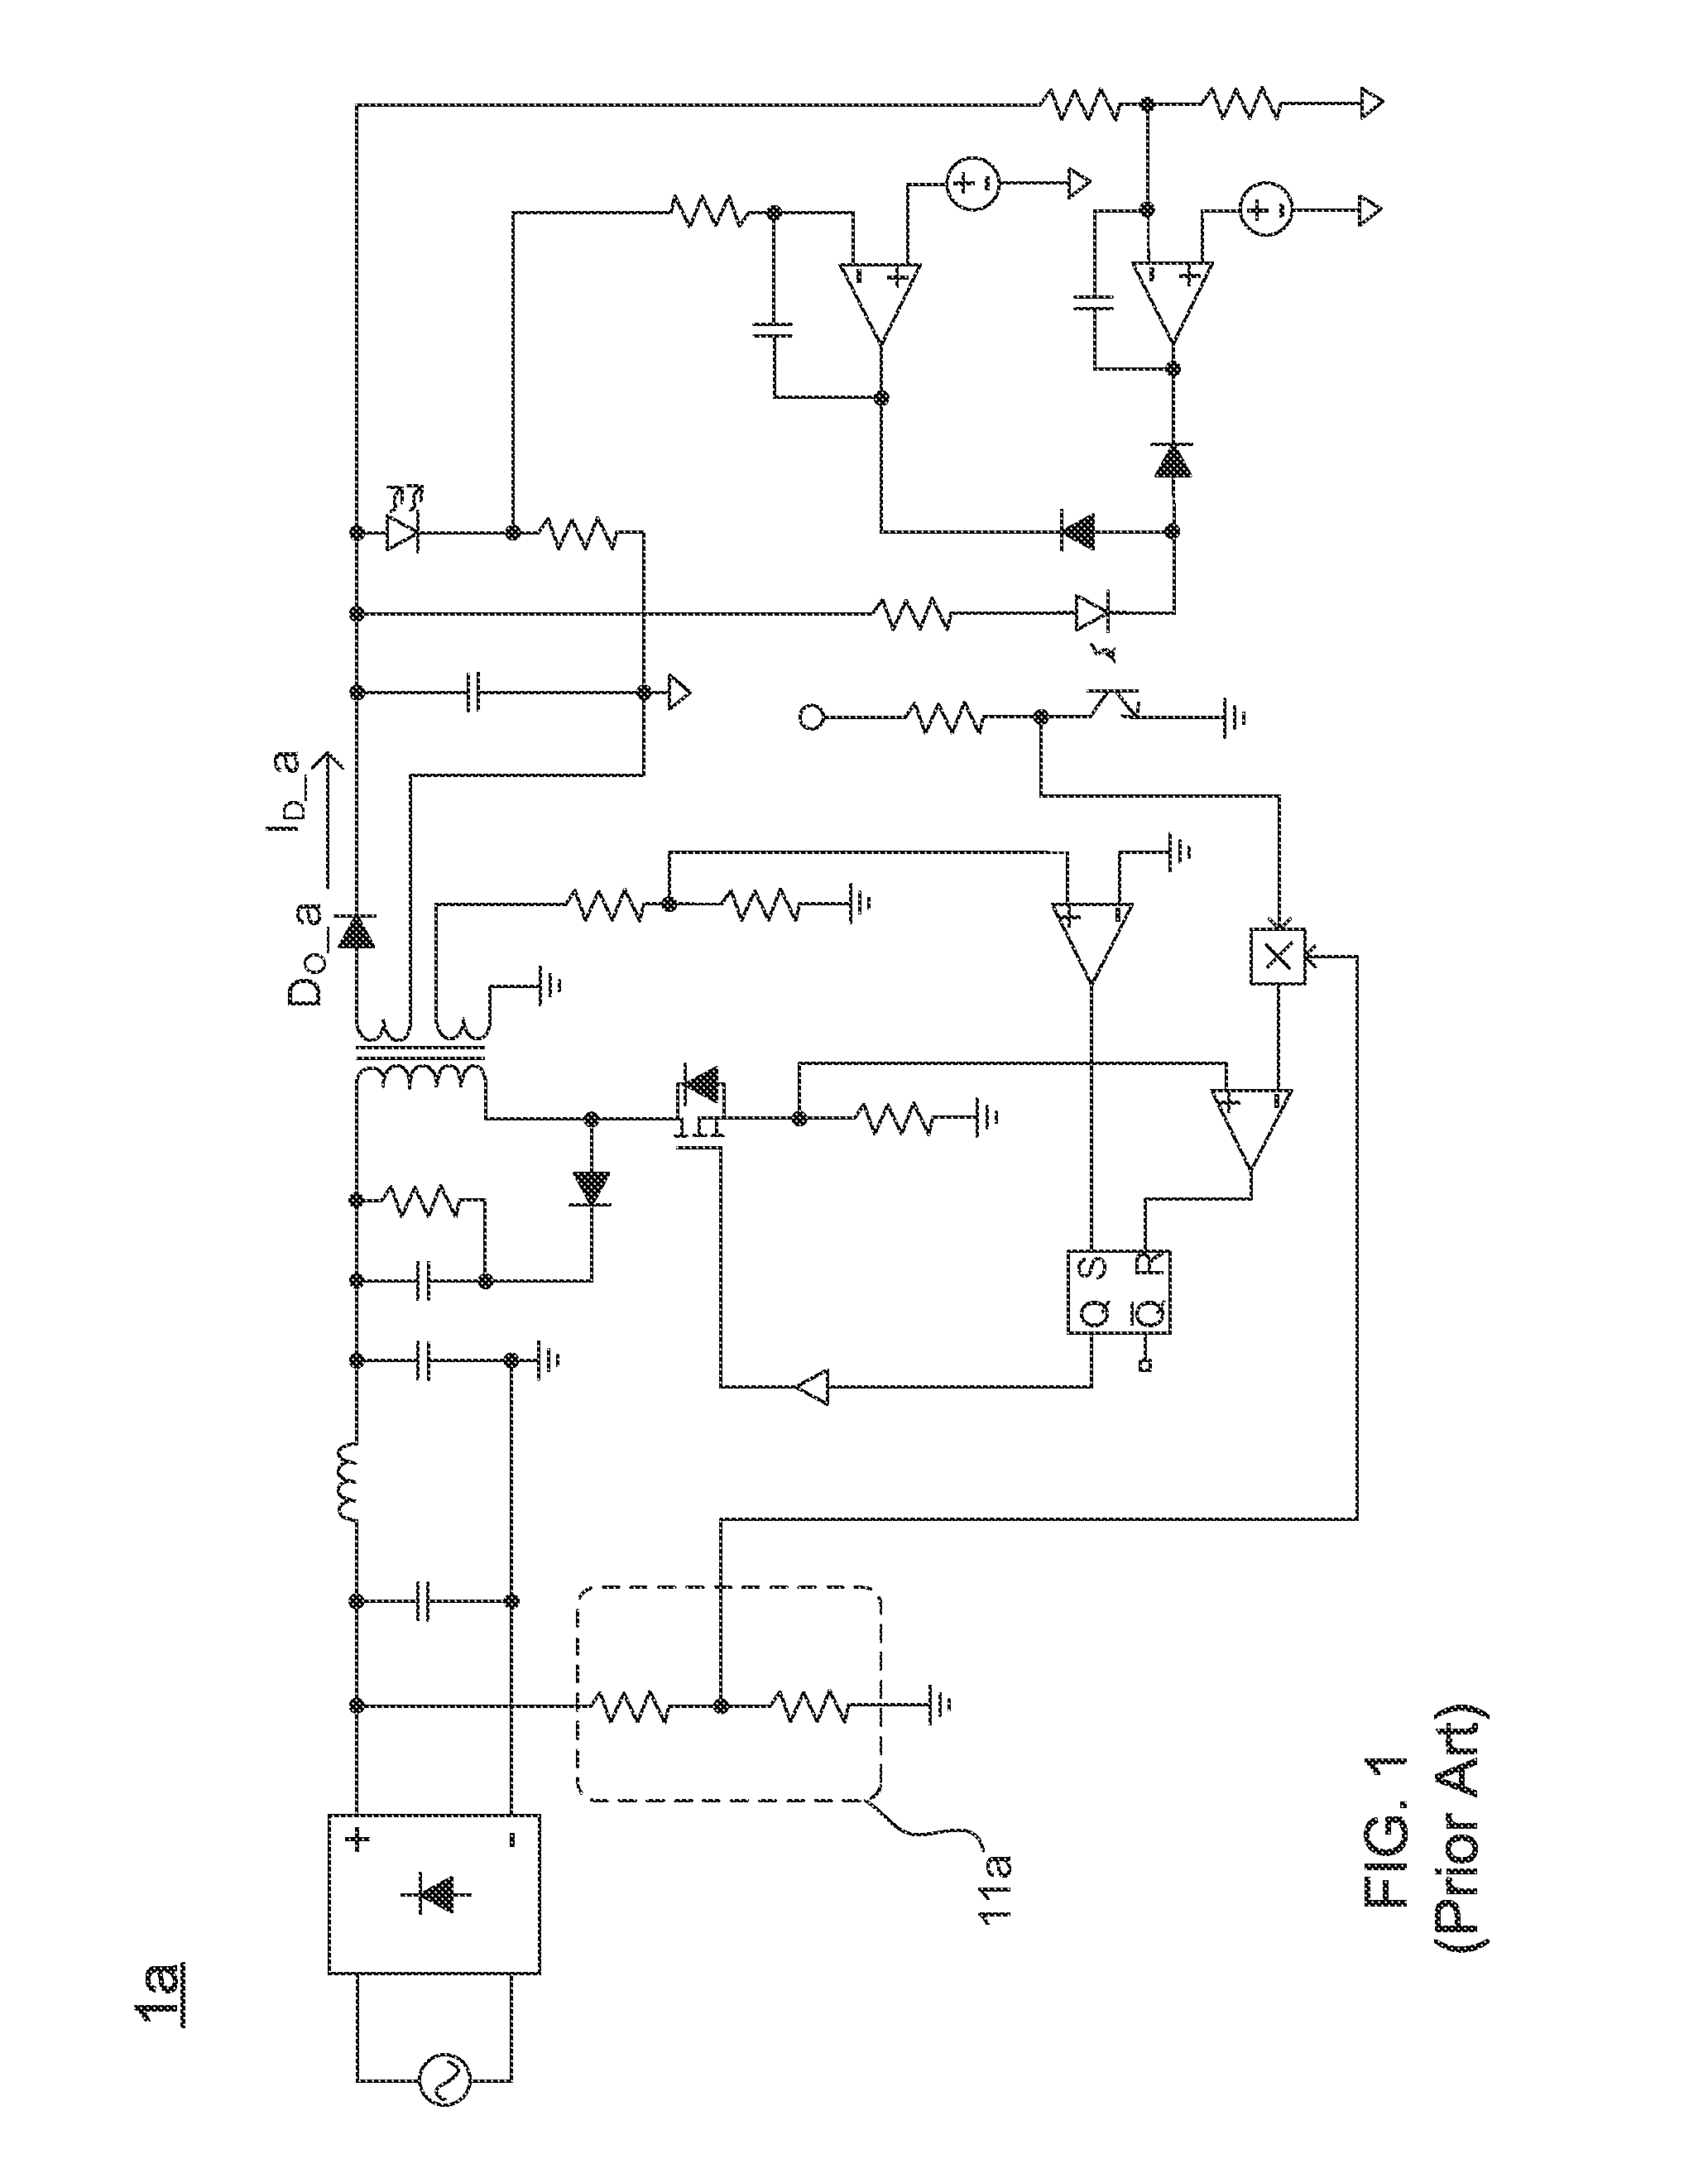 LED luminaire driving circuit with high power factor